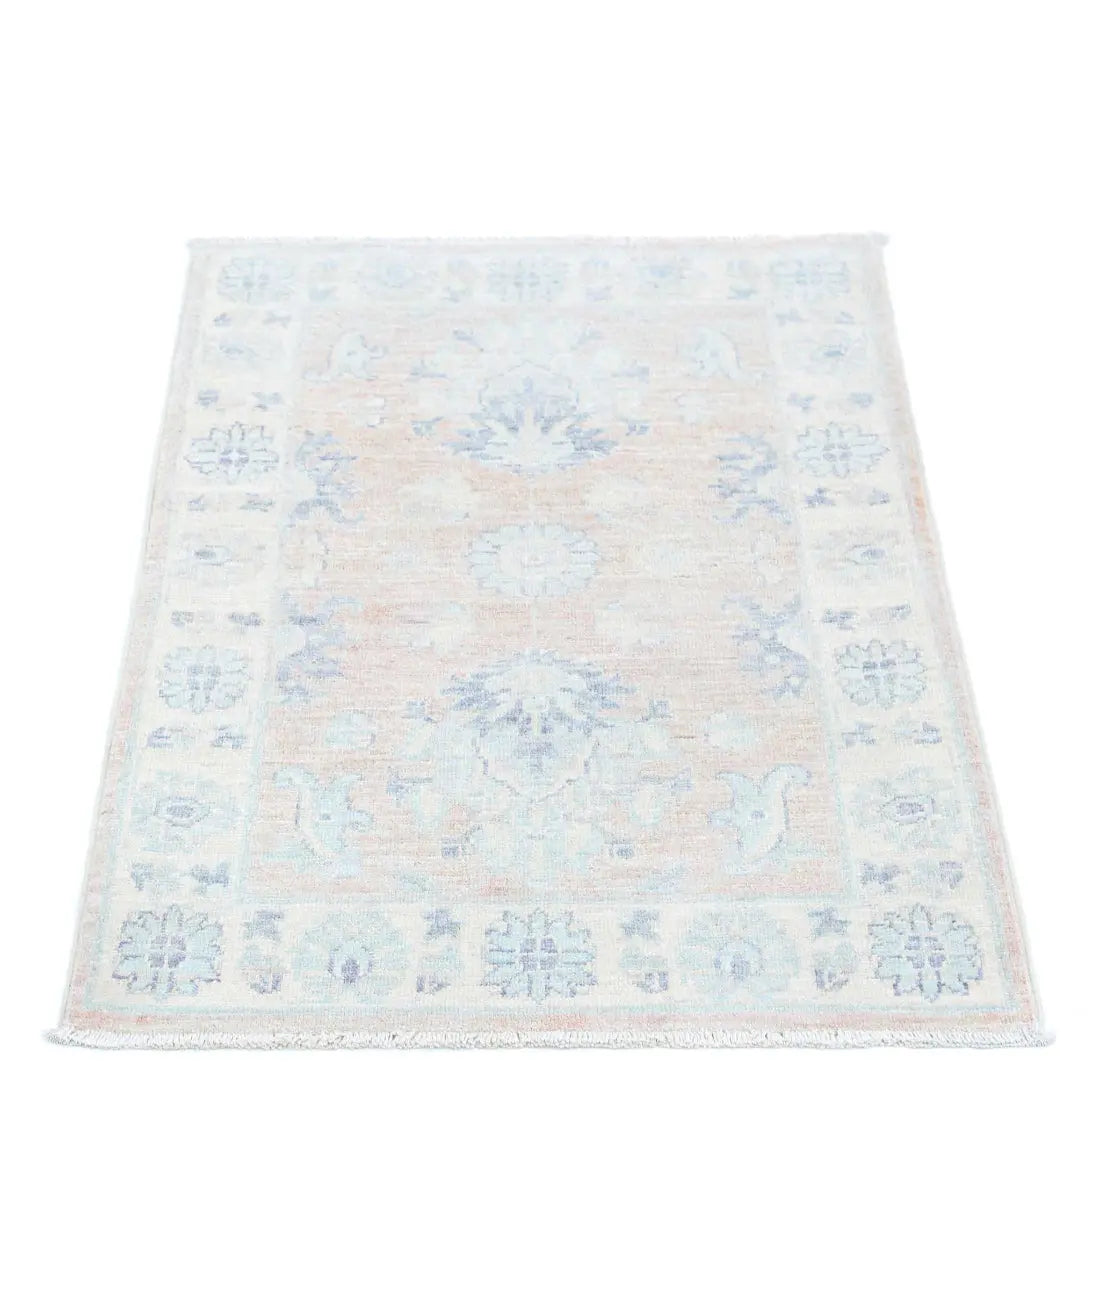 Hand Knotted Serenity Wool Rug - 2'1'' x 3'0''